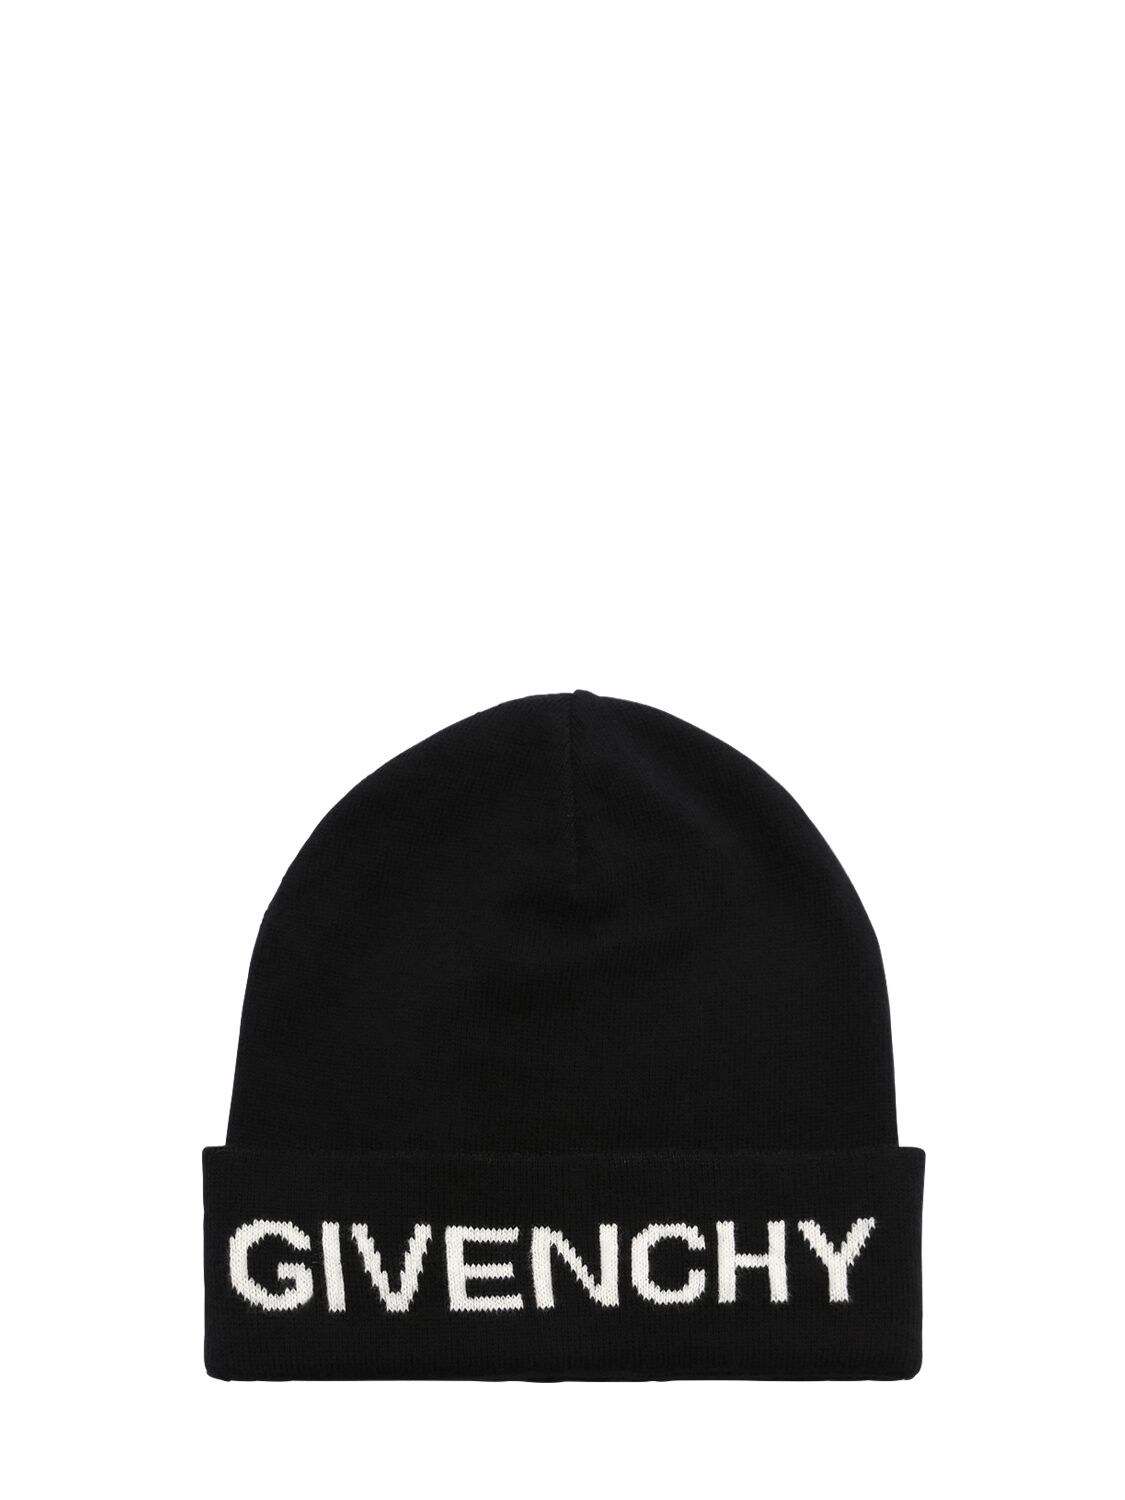 GIVENCHY KNIT COTTON & CASHMERE BEANIE HAT,72IOFL091-MDLC0